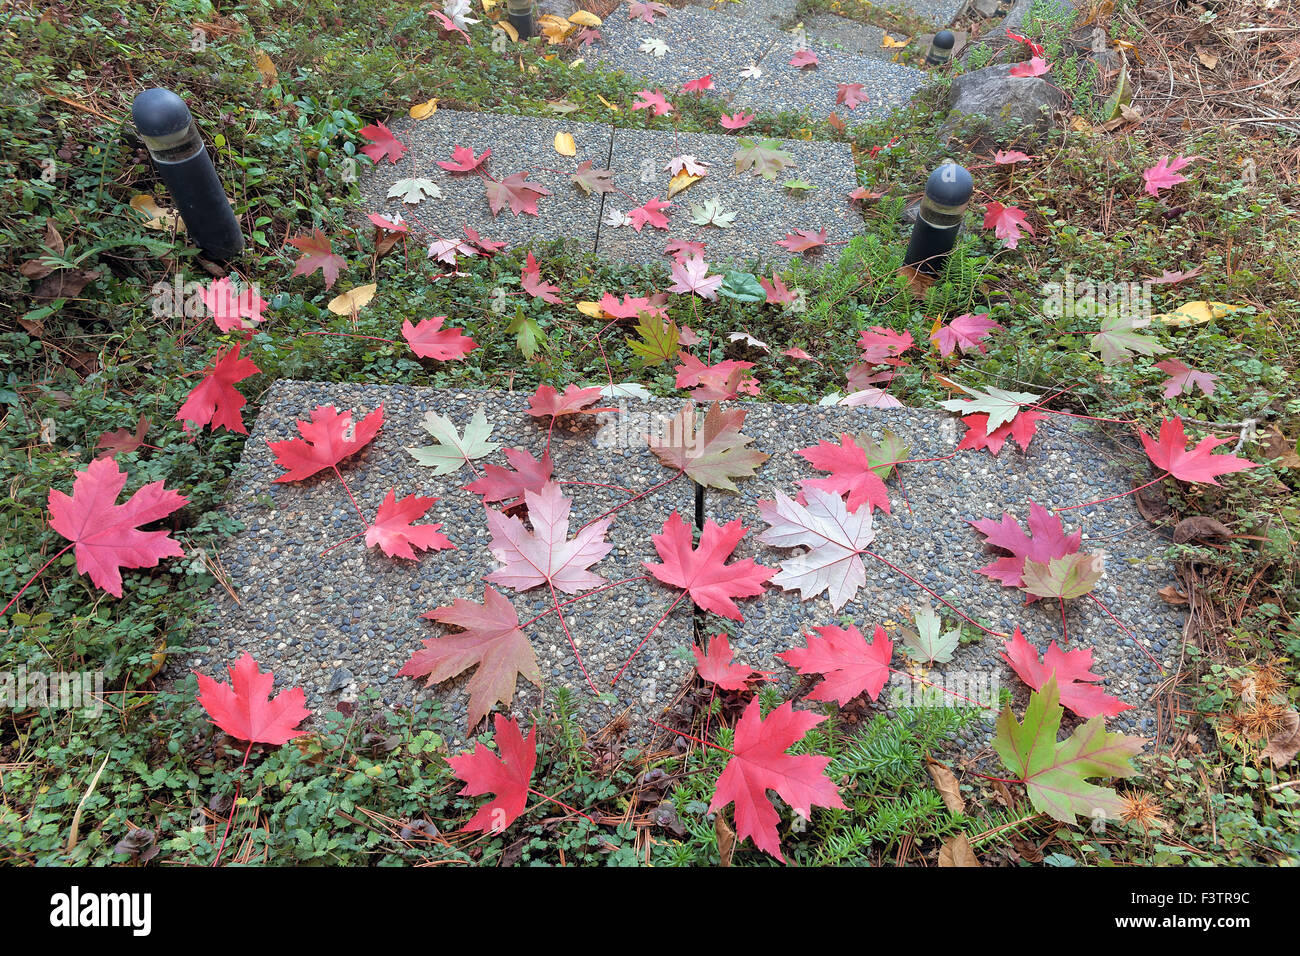 Pebbled Square Stone Steps with Fall Maple Tree Leaves in Backyard Garden Stock Photo